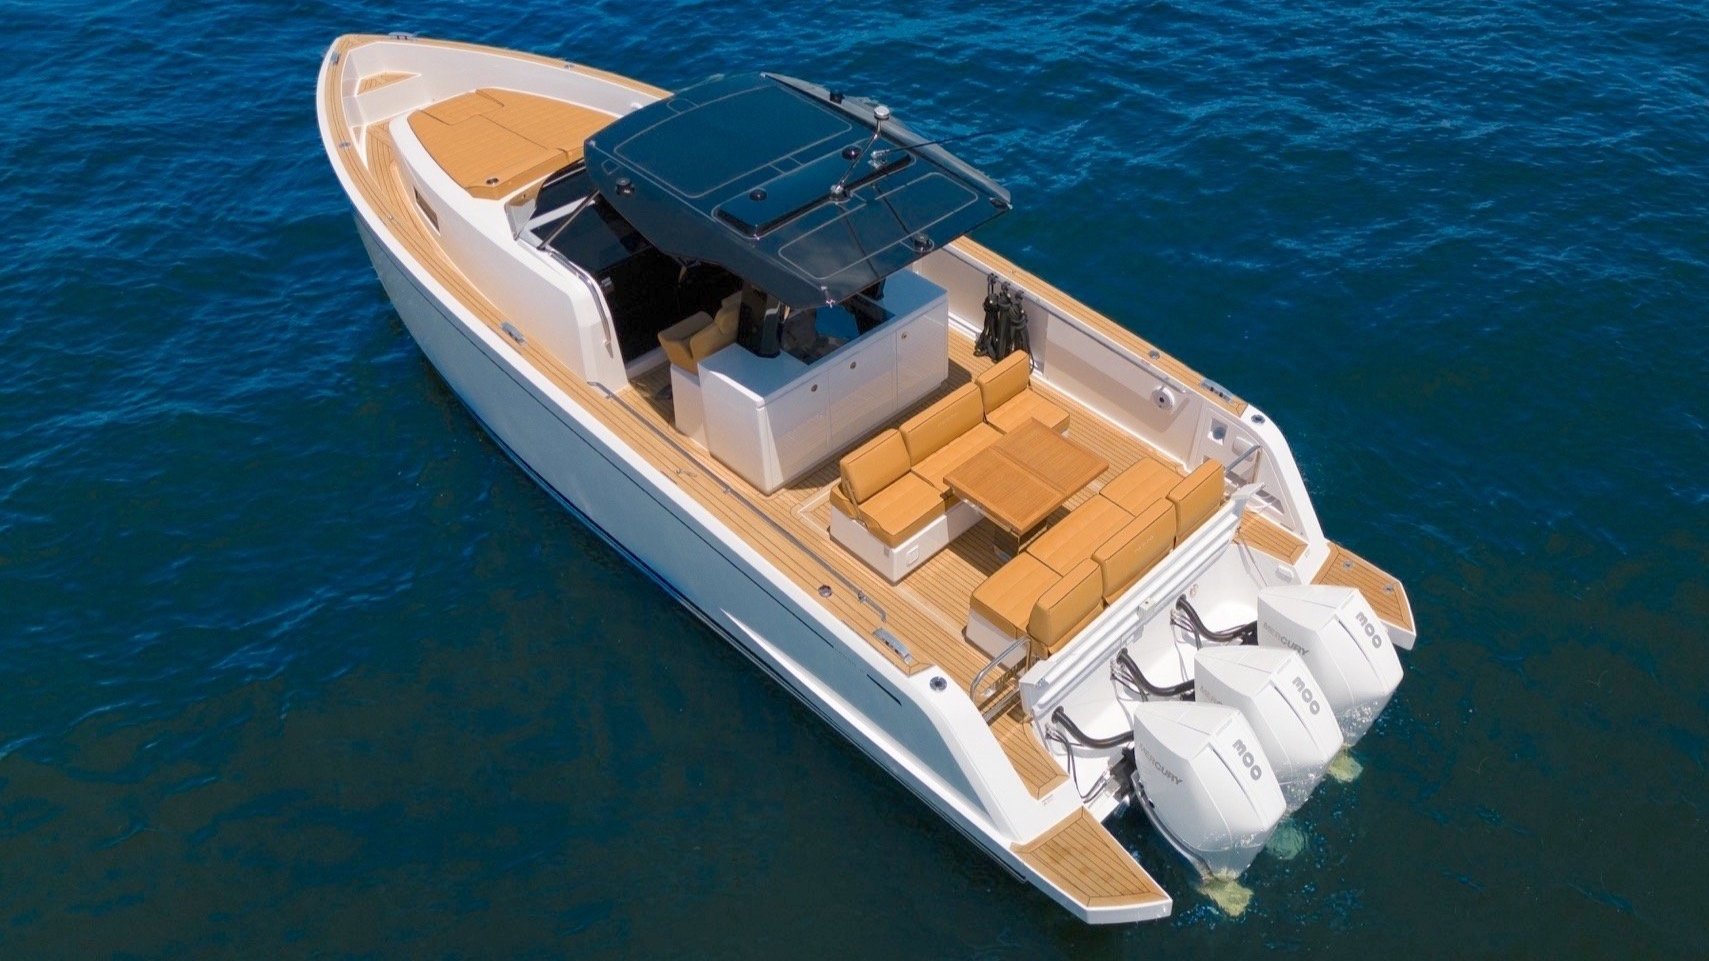 38 ft Pardo Alpha | From $2100 | 12 guest max